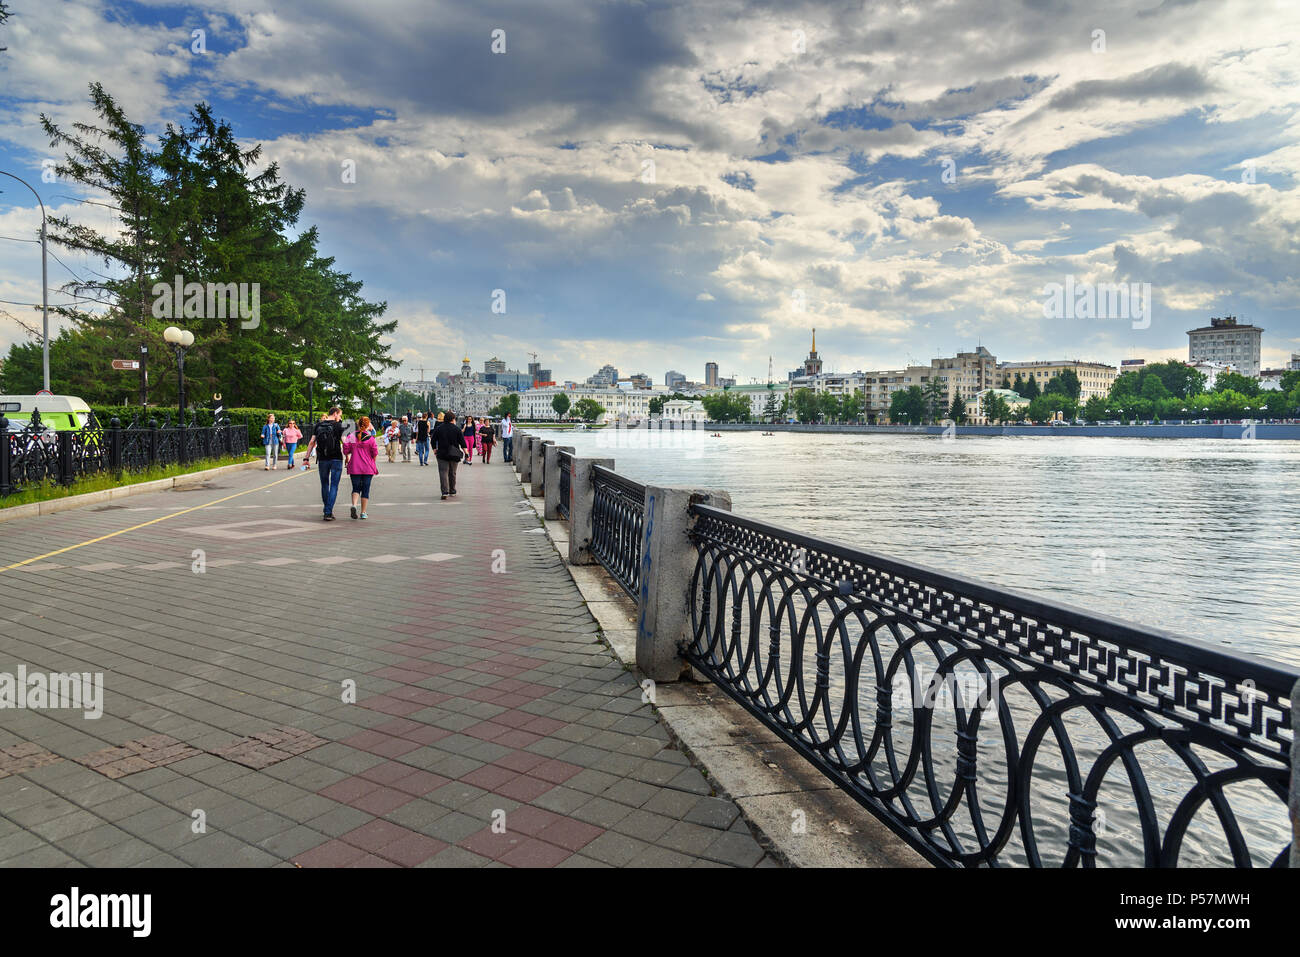 Yekaterinburg, Russia - June 21, 2018: View of embankment on Iset River in center of city Stock Photo